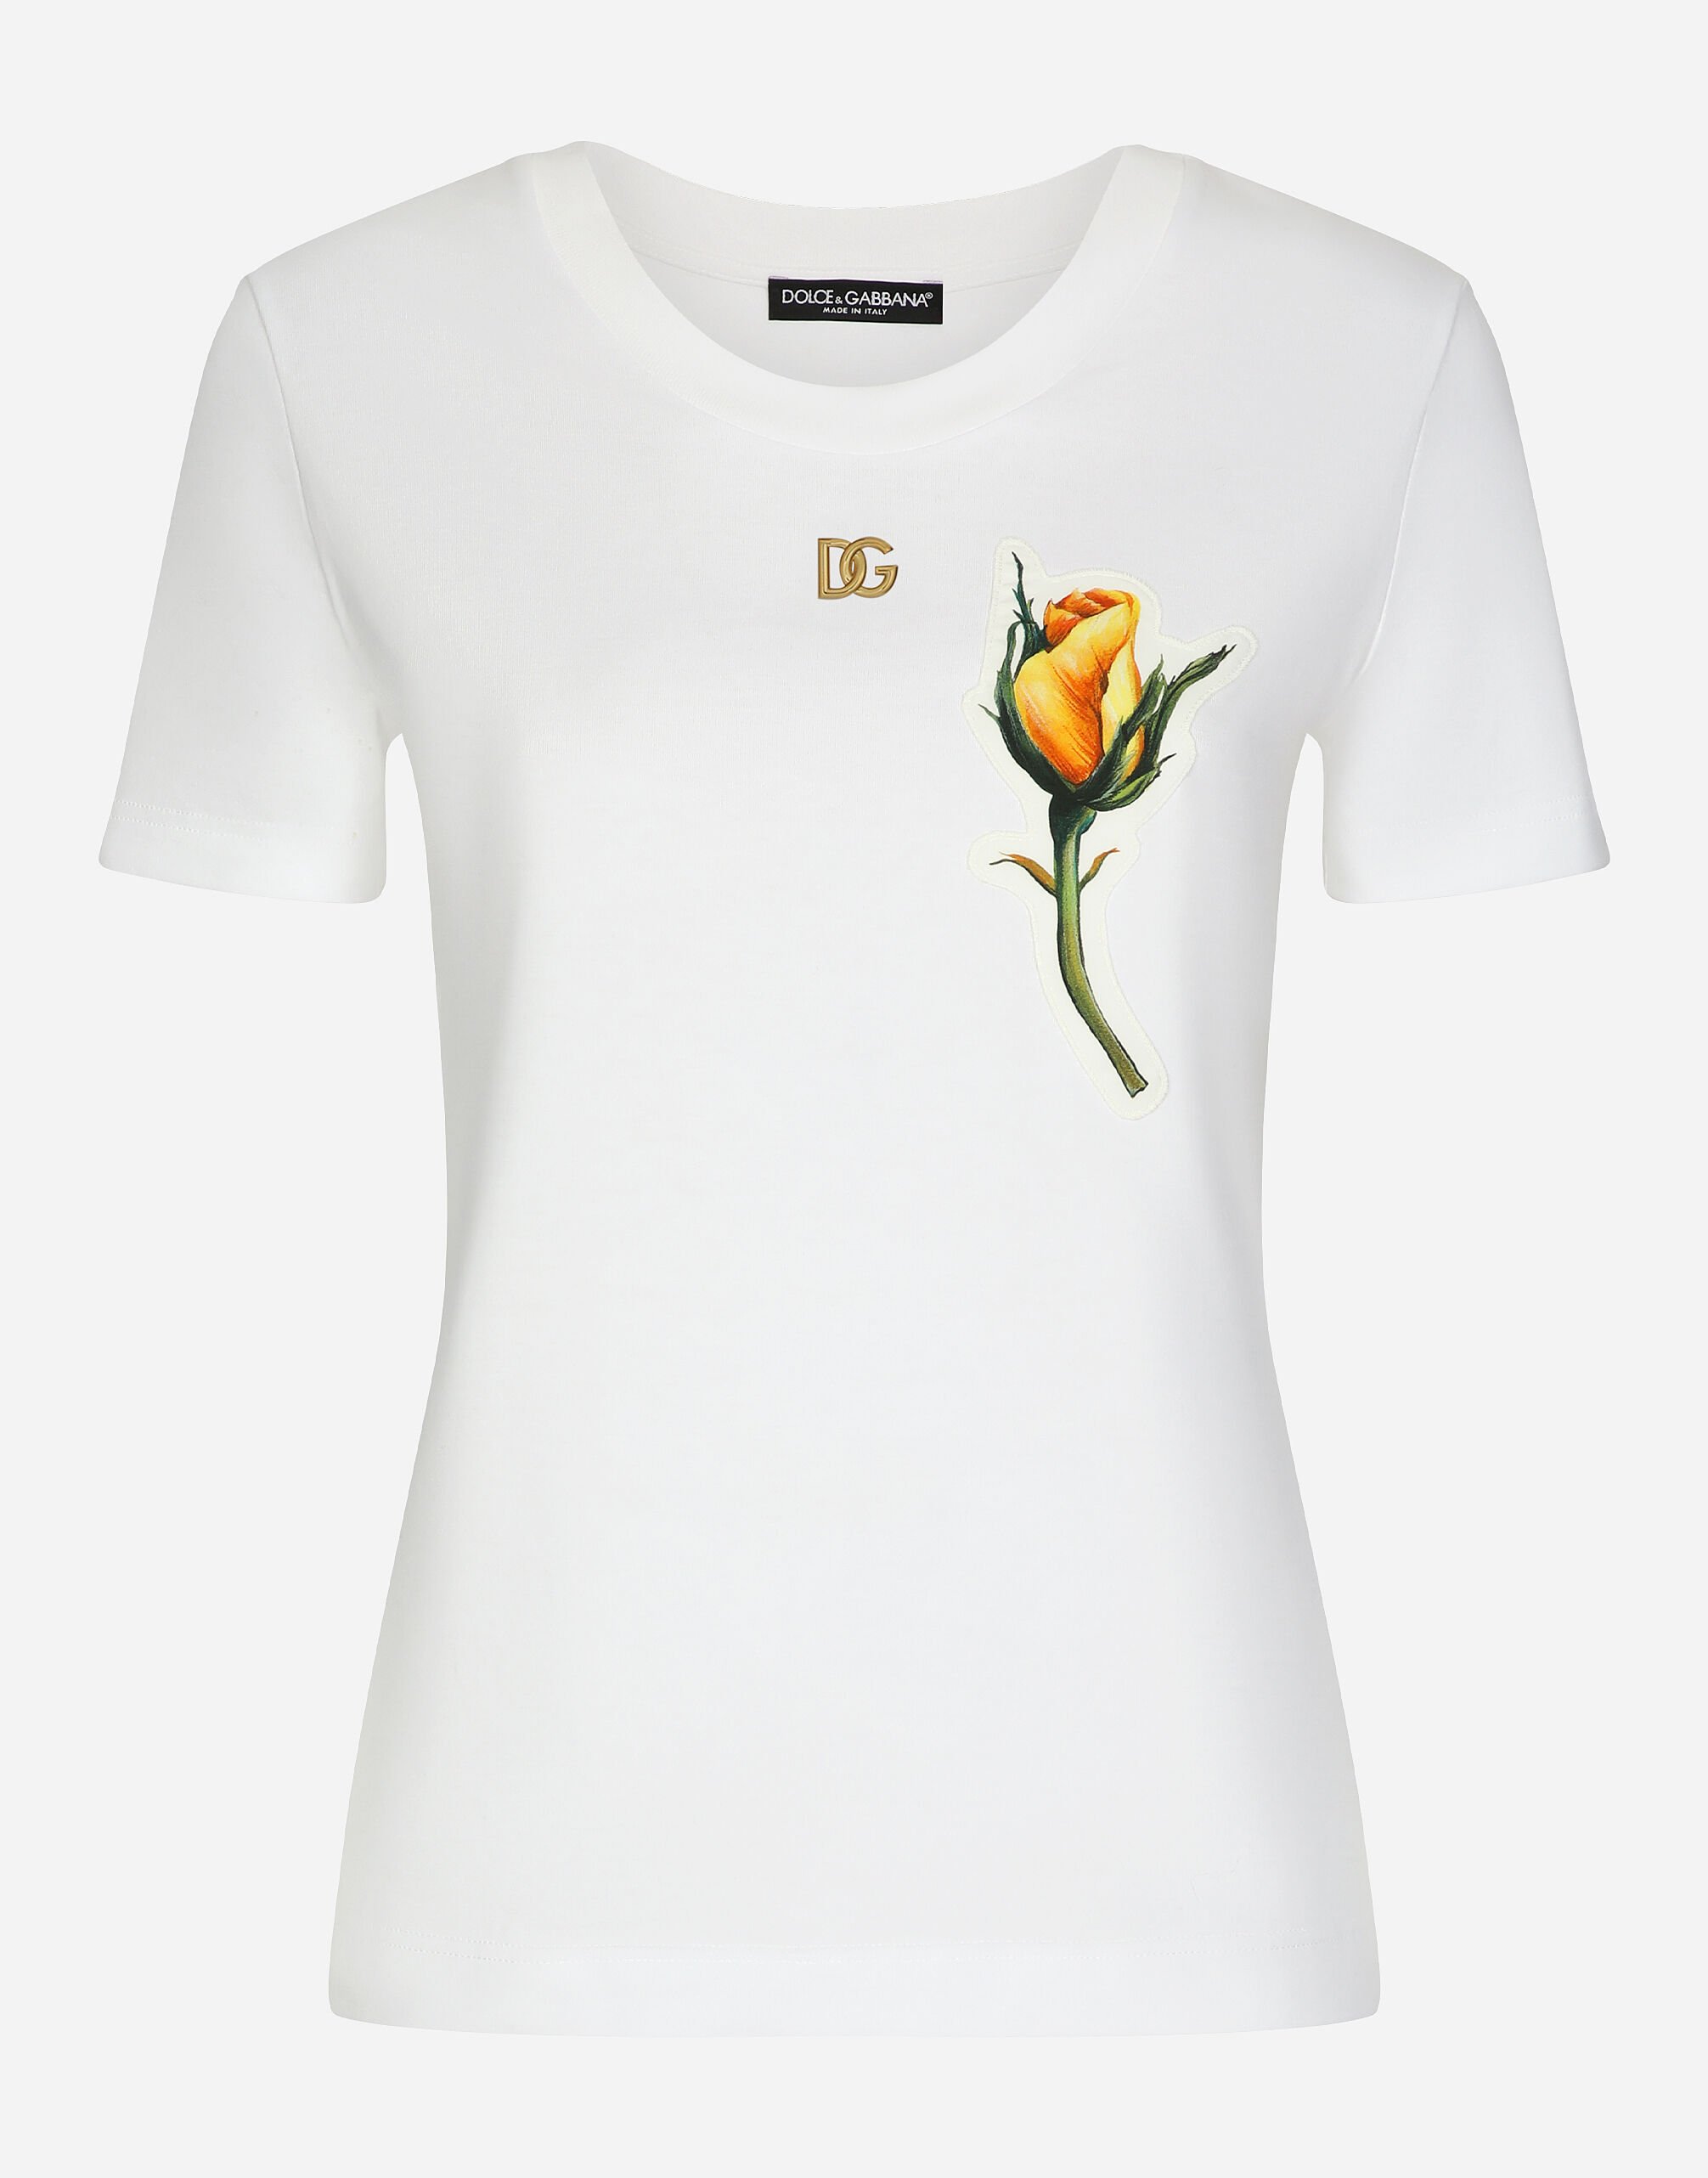 ${brand} Jersey T-shirt with DG logo and yellow rose-embroidered patch ${colorDescription} ${masterID}